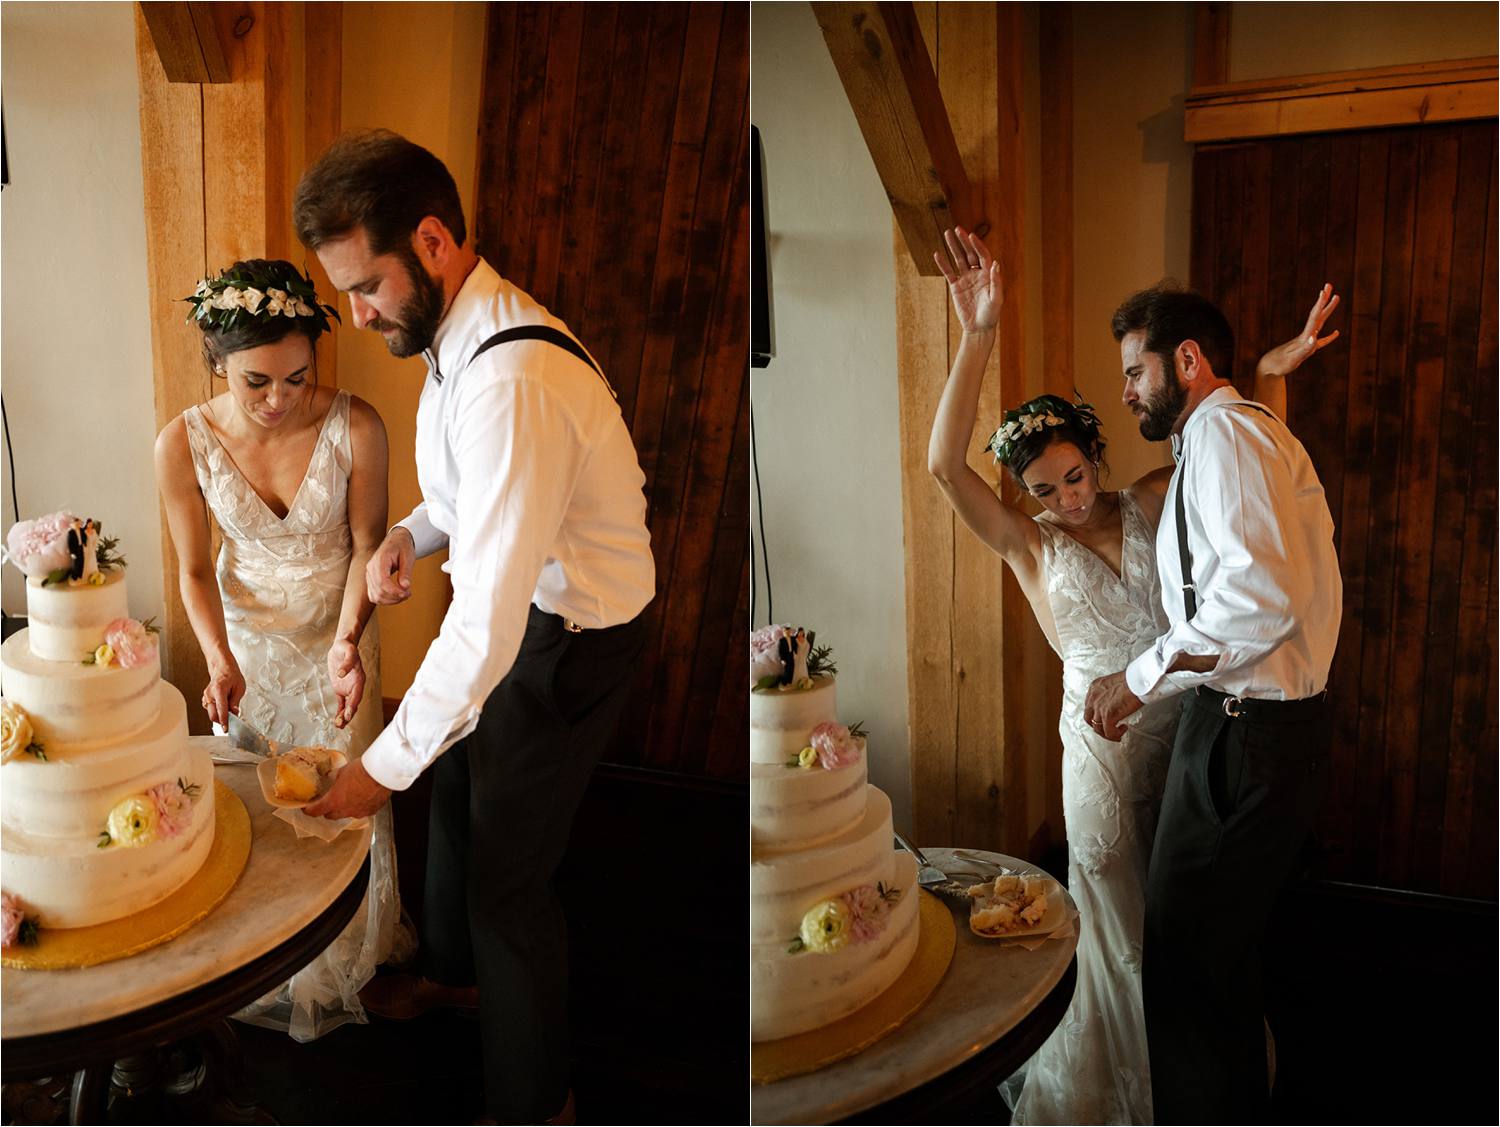 Bride and groom during cake cutting at rustic barn reception